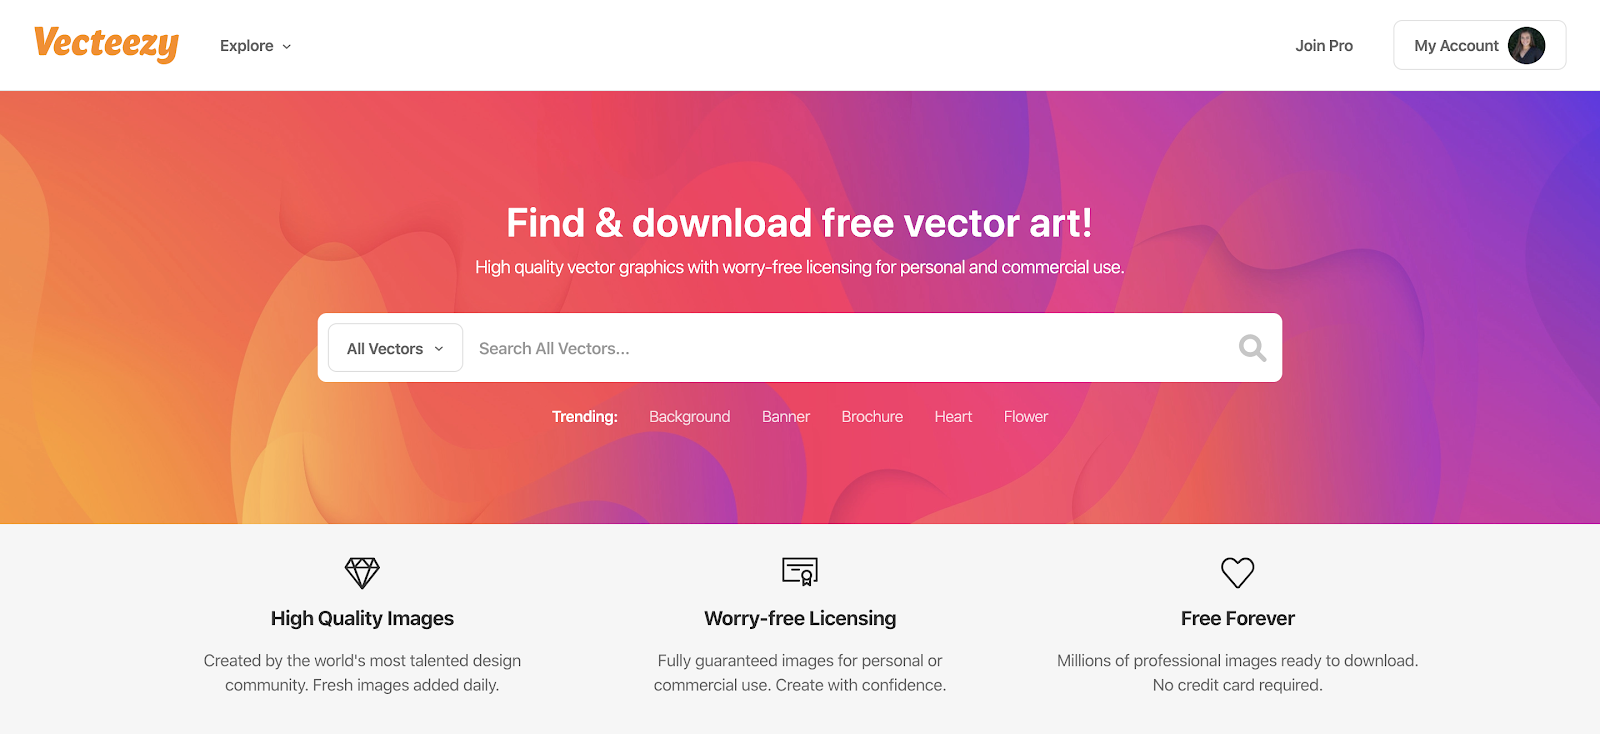 The Top Three Free Design Tools You Should Already Be Using